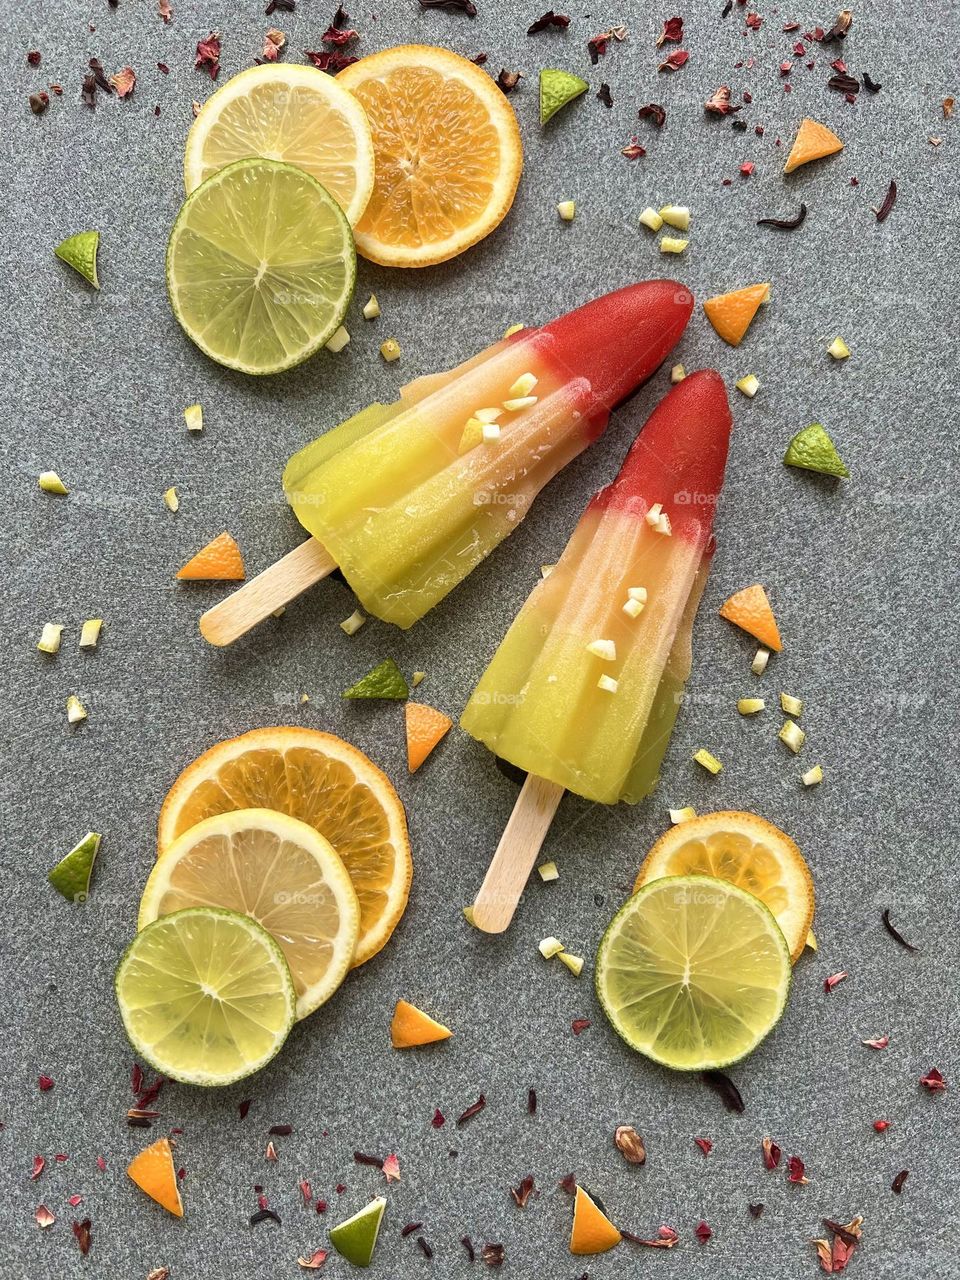 Summer treats, summer time, summer mood. Delicious lollies and juicy fruits. Pineapple,strawberry and orange iced juice. Great choice for hot summer days.😉